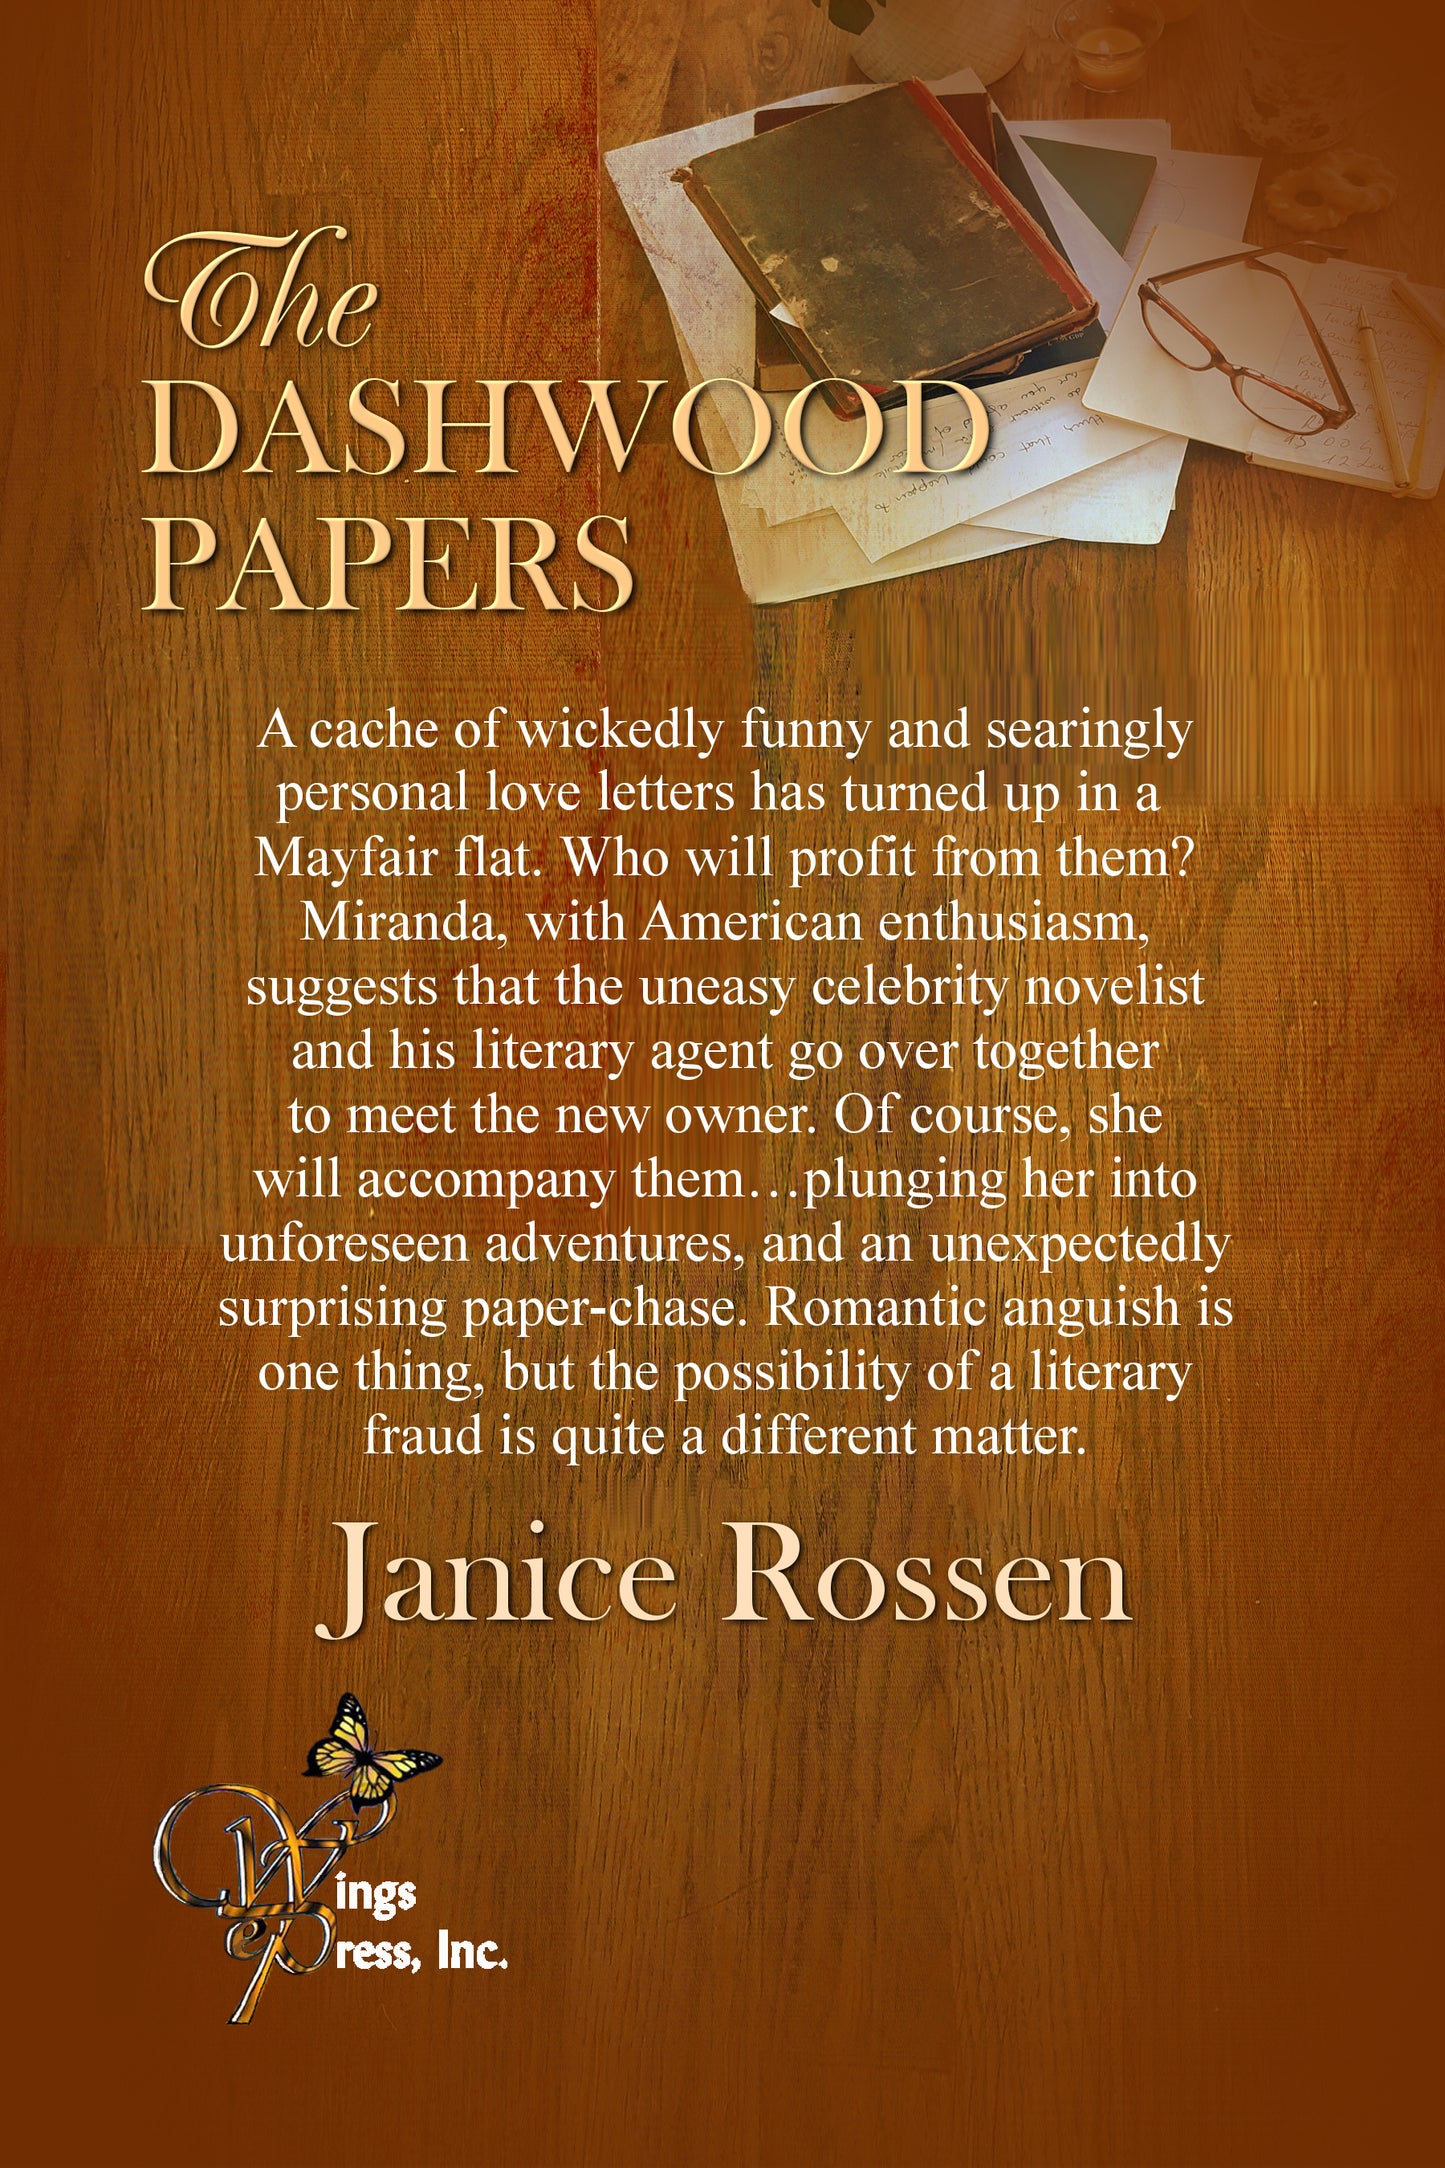 The Dashwood Papers